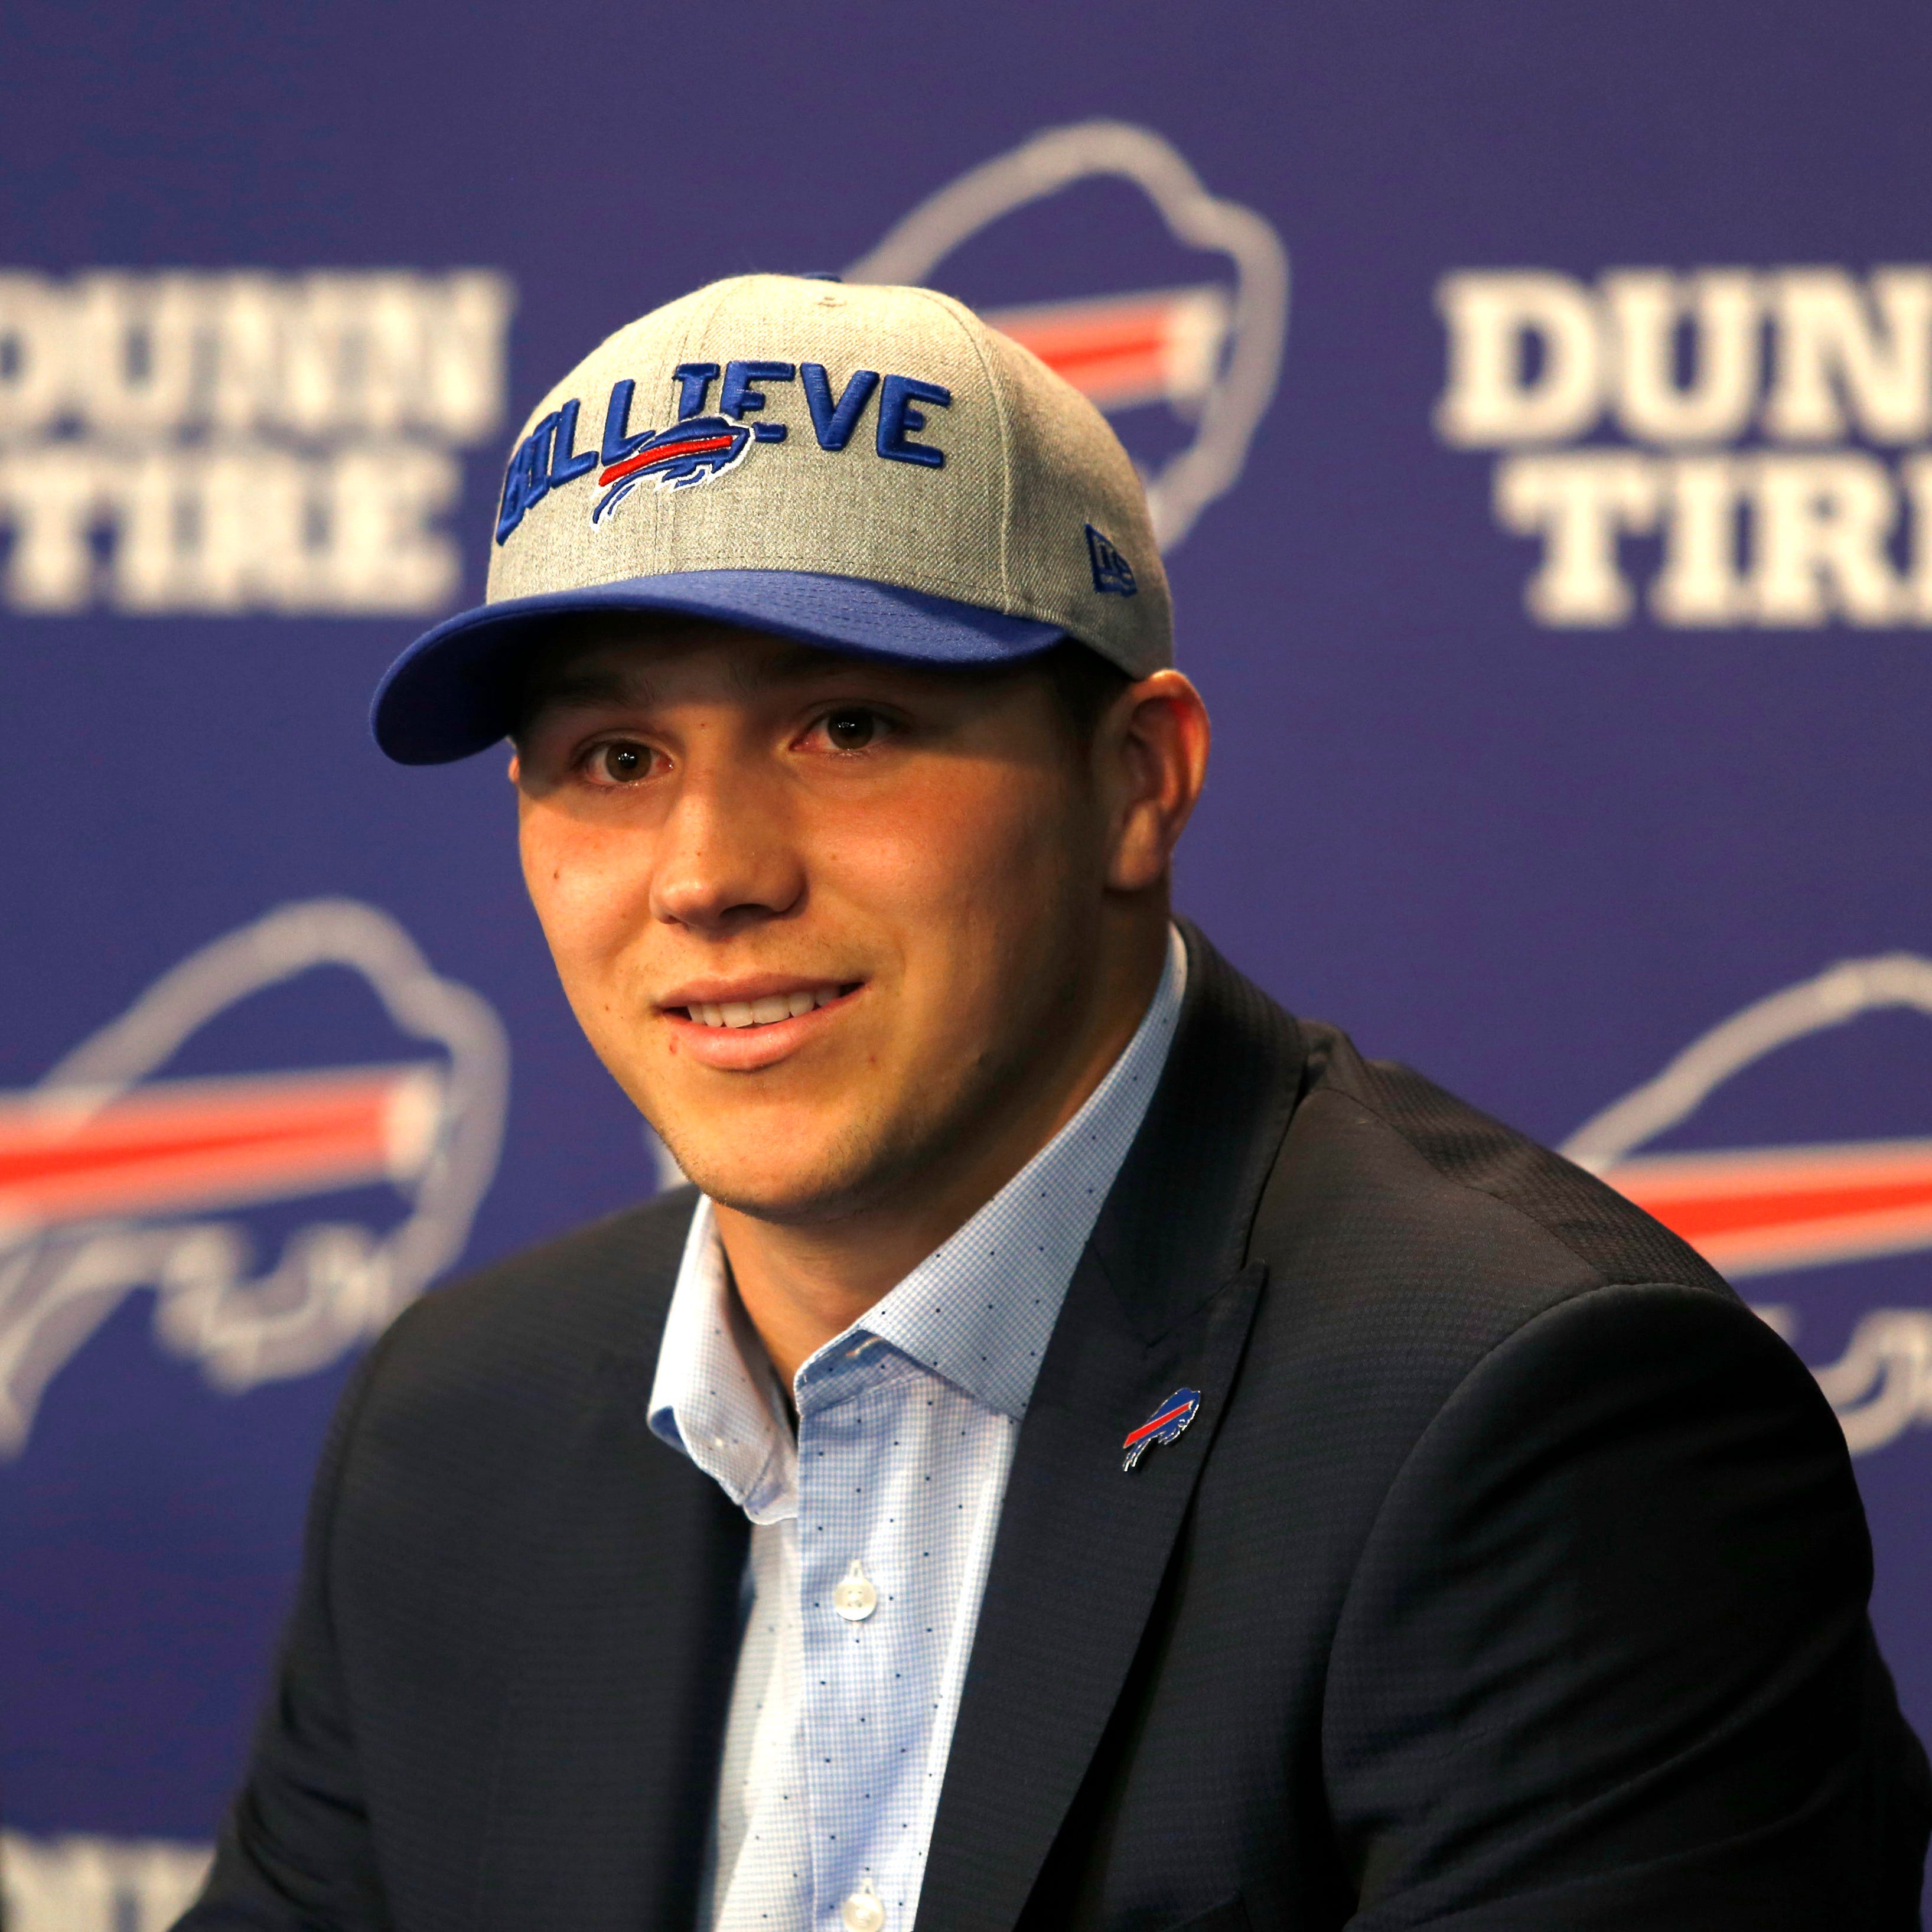 Josh Allen is eager to move on from the draft week revelation of racist tweets.